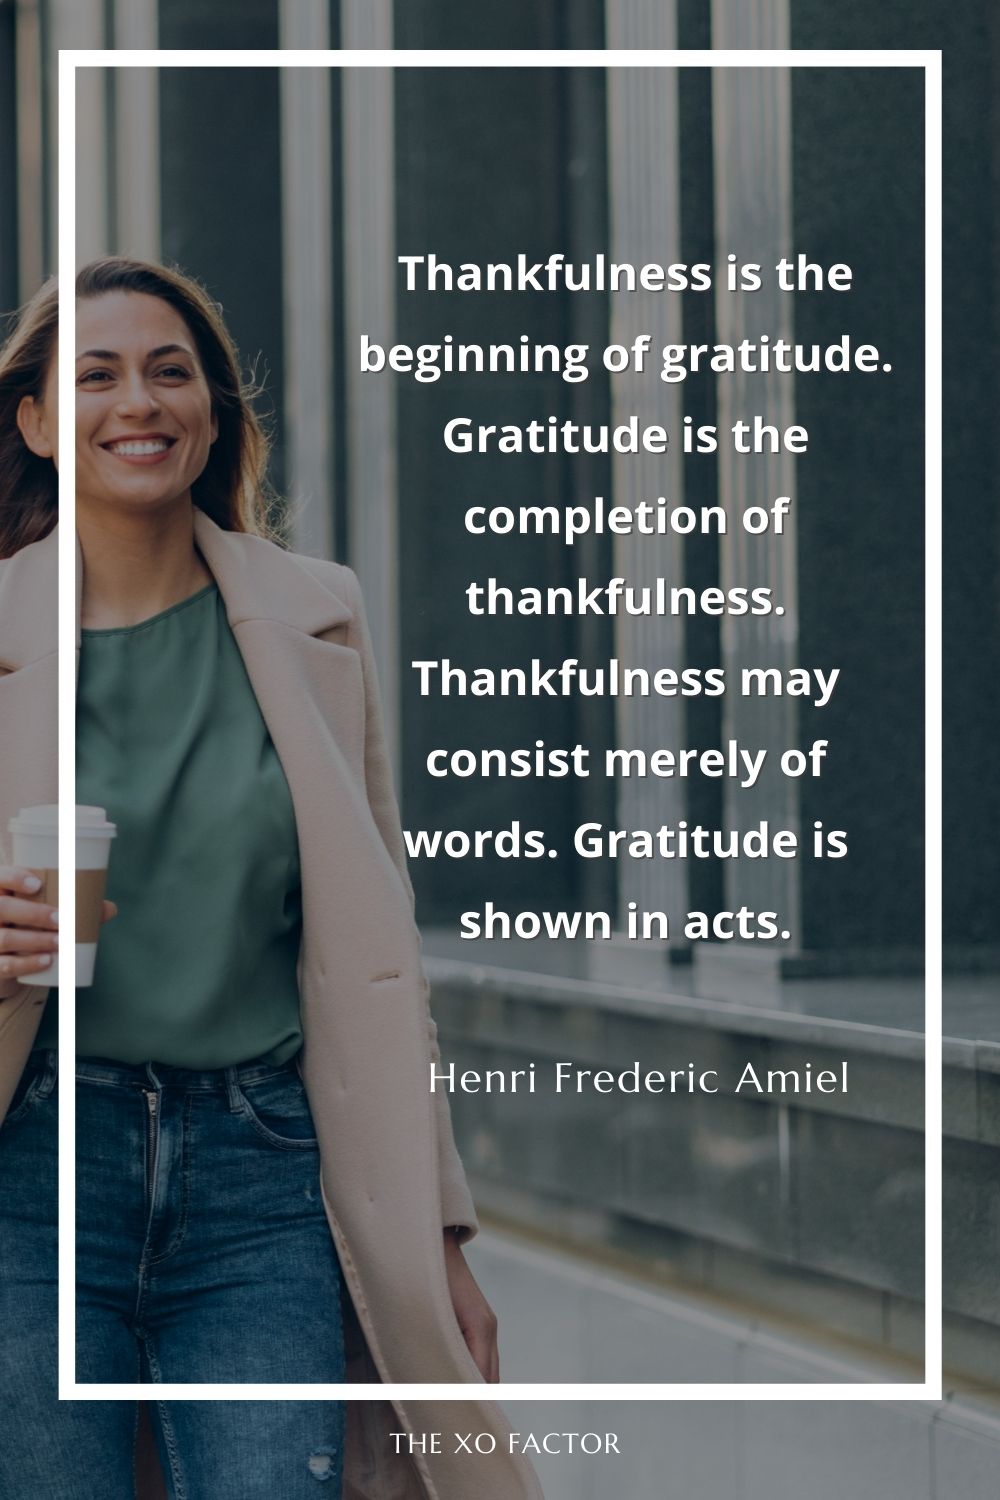 Thankfulness is the beginning of gratitude. Gratitude is the completion of thankfulness. Thankfulness may consist merely of words. Gratitude is shown in acts.